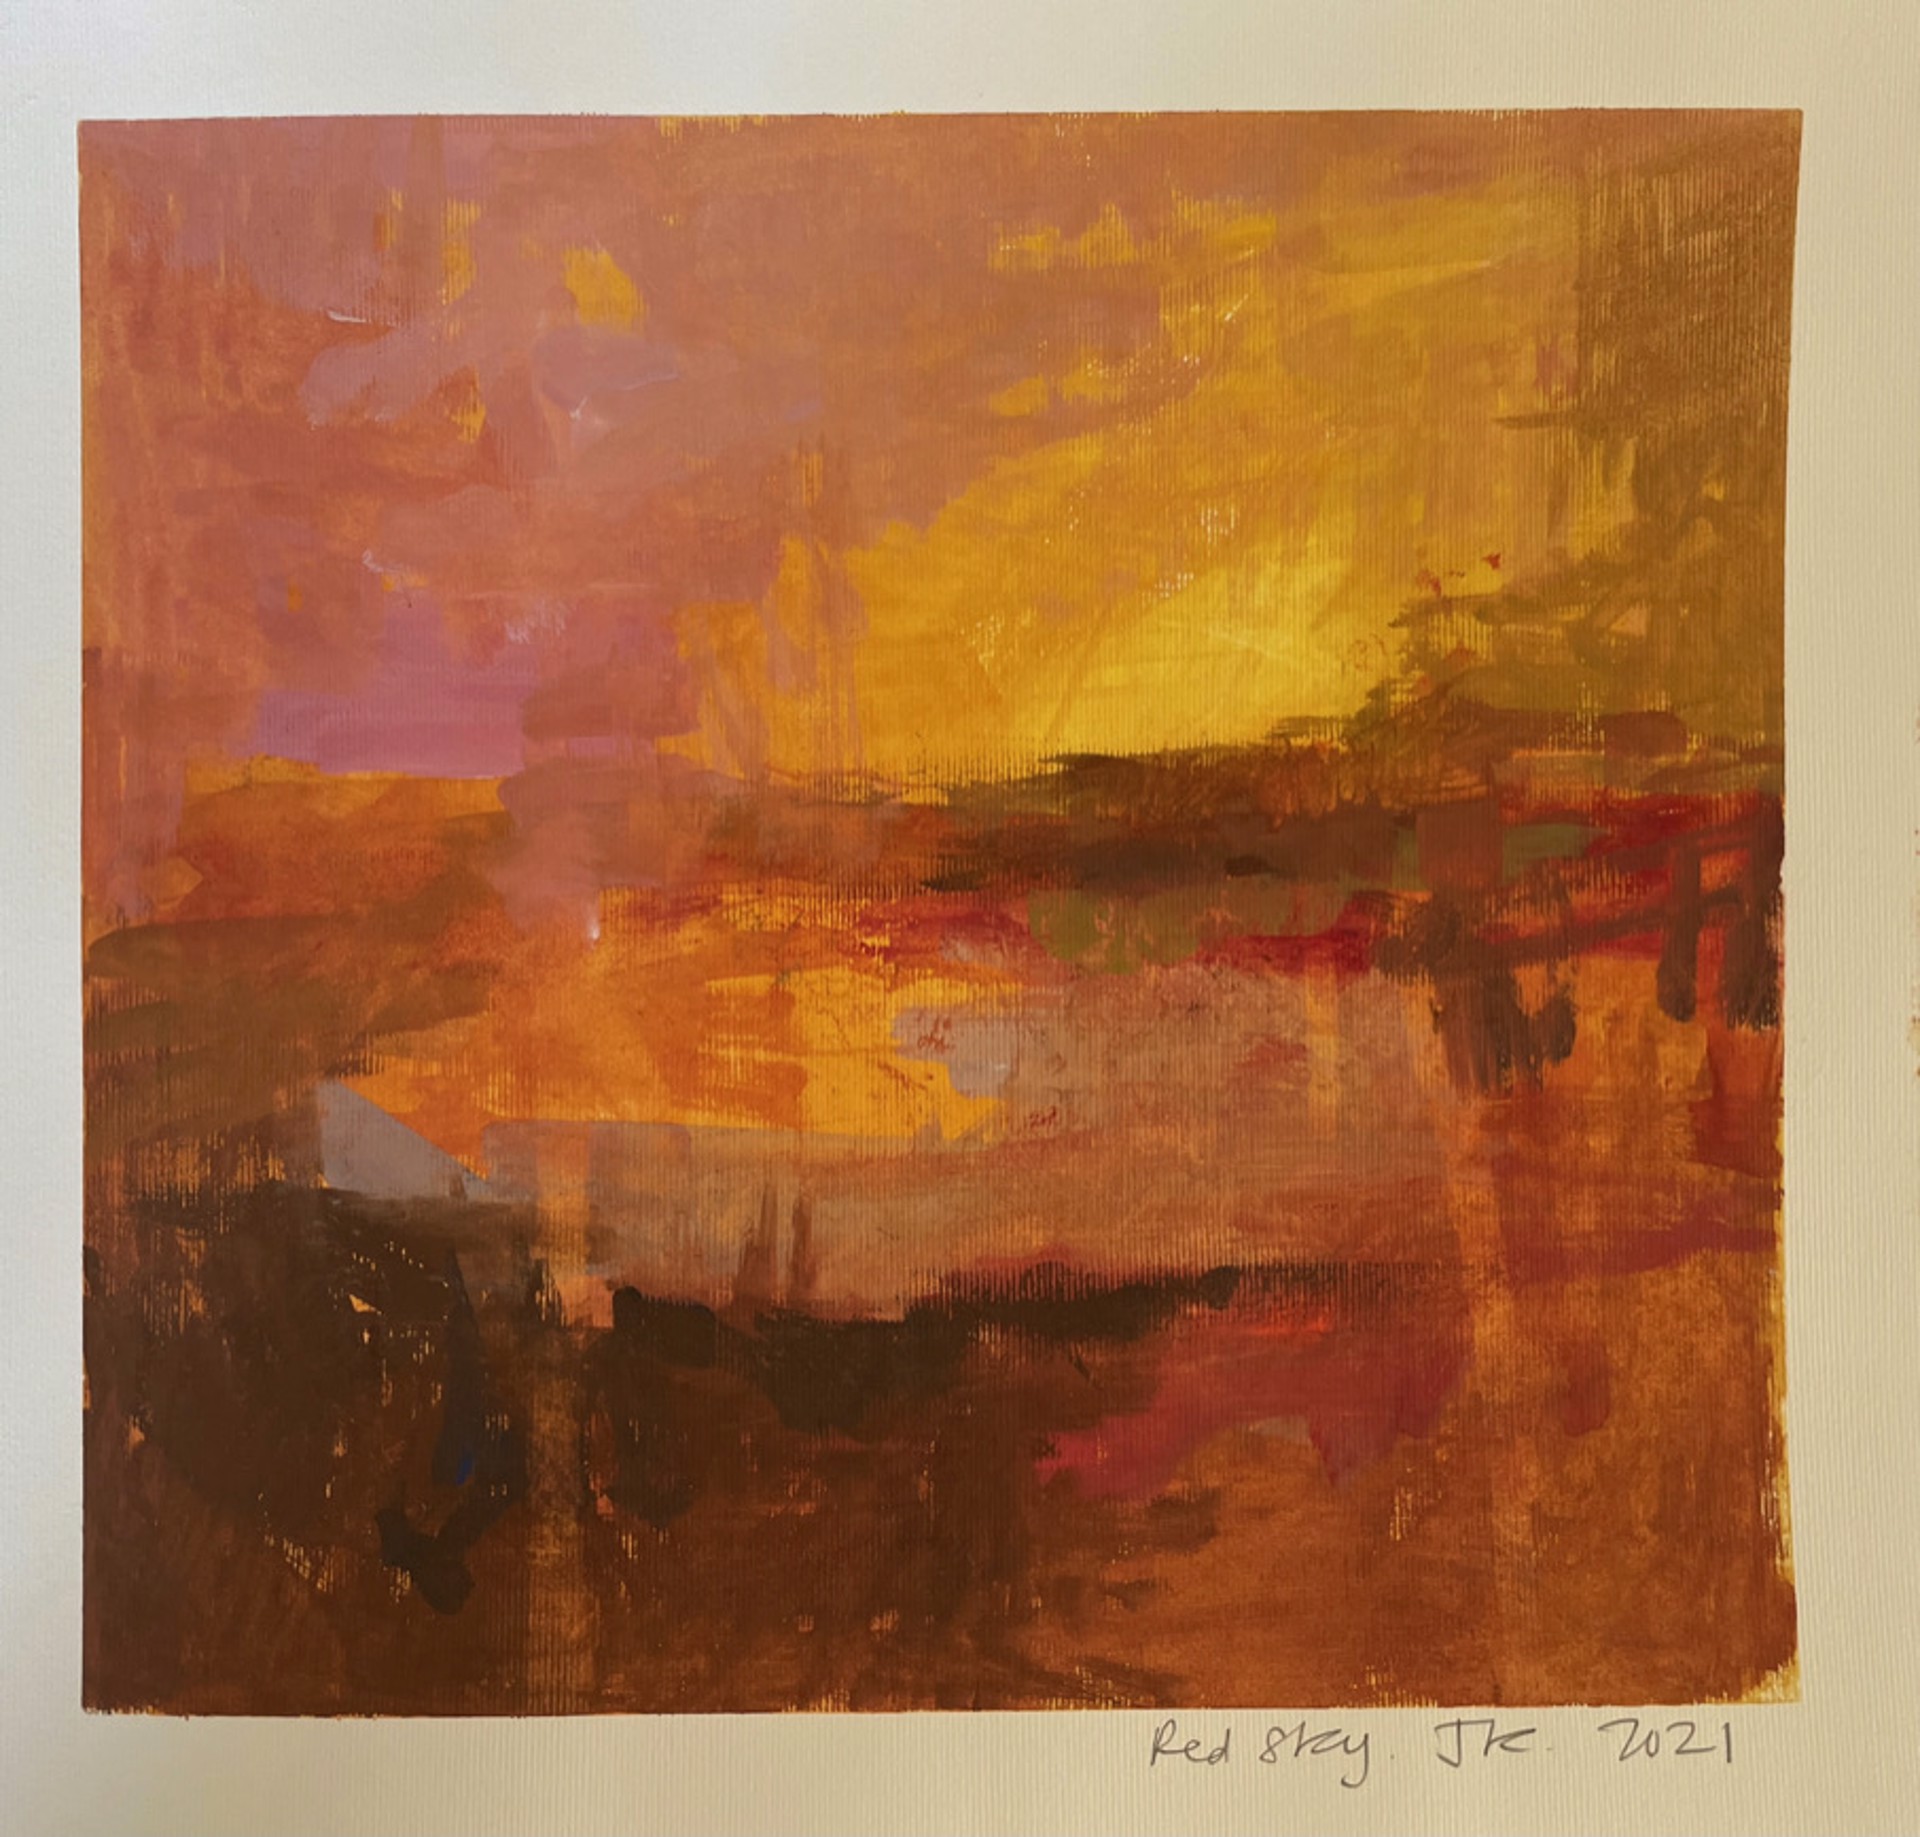 Red Sky Study by Jane Kell